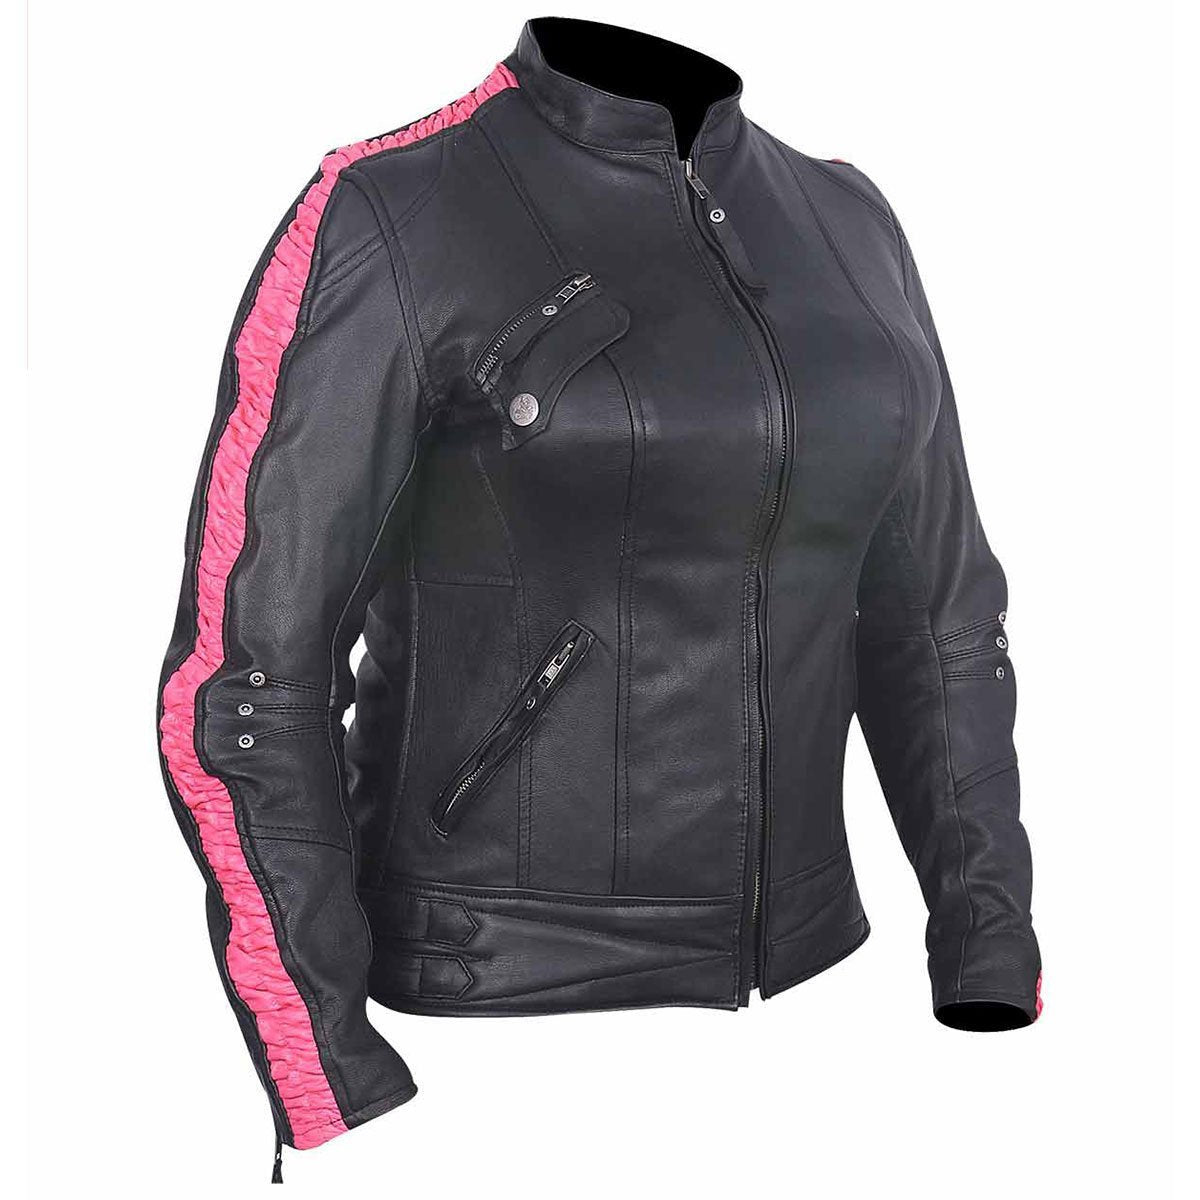 Vance Ladies Premium Leather Jacket with Scrunch Sides